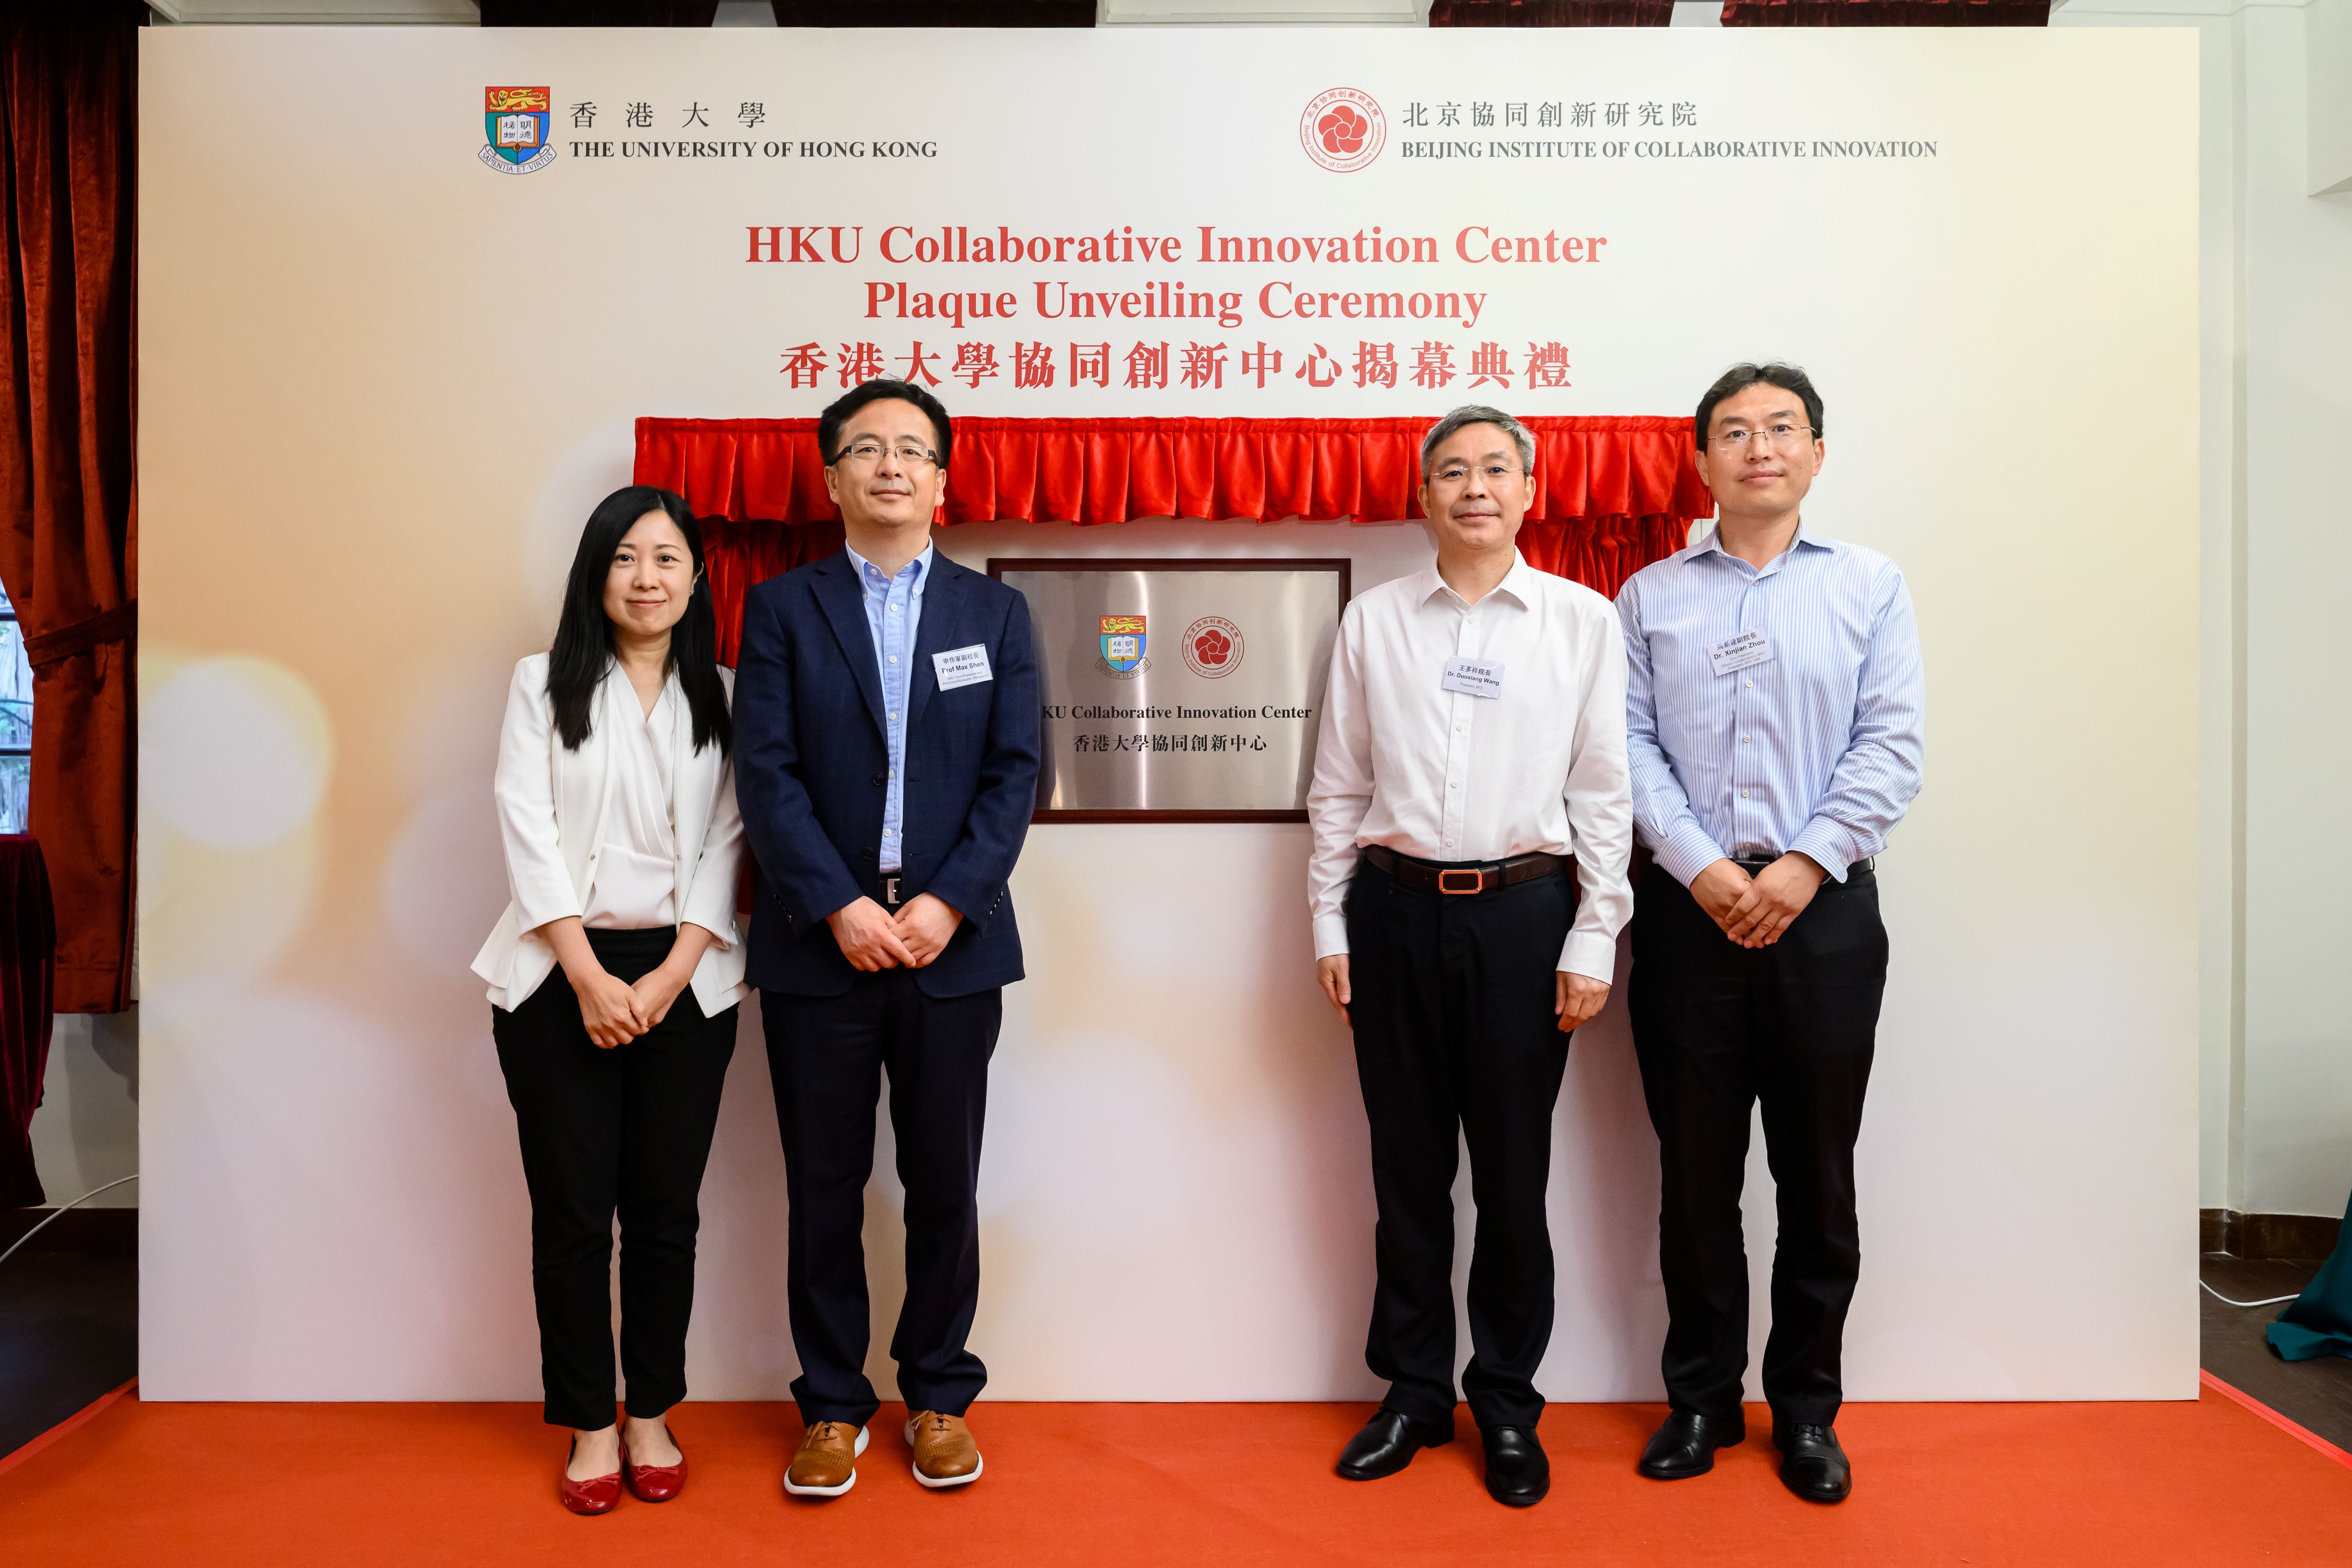 (From left) Professor Alice Wong, Associate Vice-President (Research), Professor Max Shen, Vice-President and Pro-Vice-Chancellor (Research), Dr Duoxiang Wang, President of BICI, and Dr Xinjian Zhou, Vice-President (Global Collaboration) of BICI, officiating the plaque unveiling ceremony of the HKU Collaborative Innovation Center.